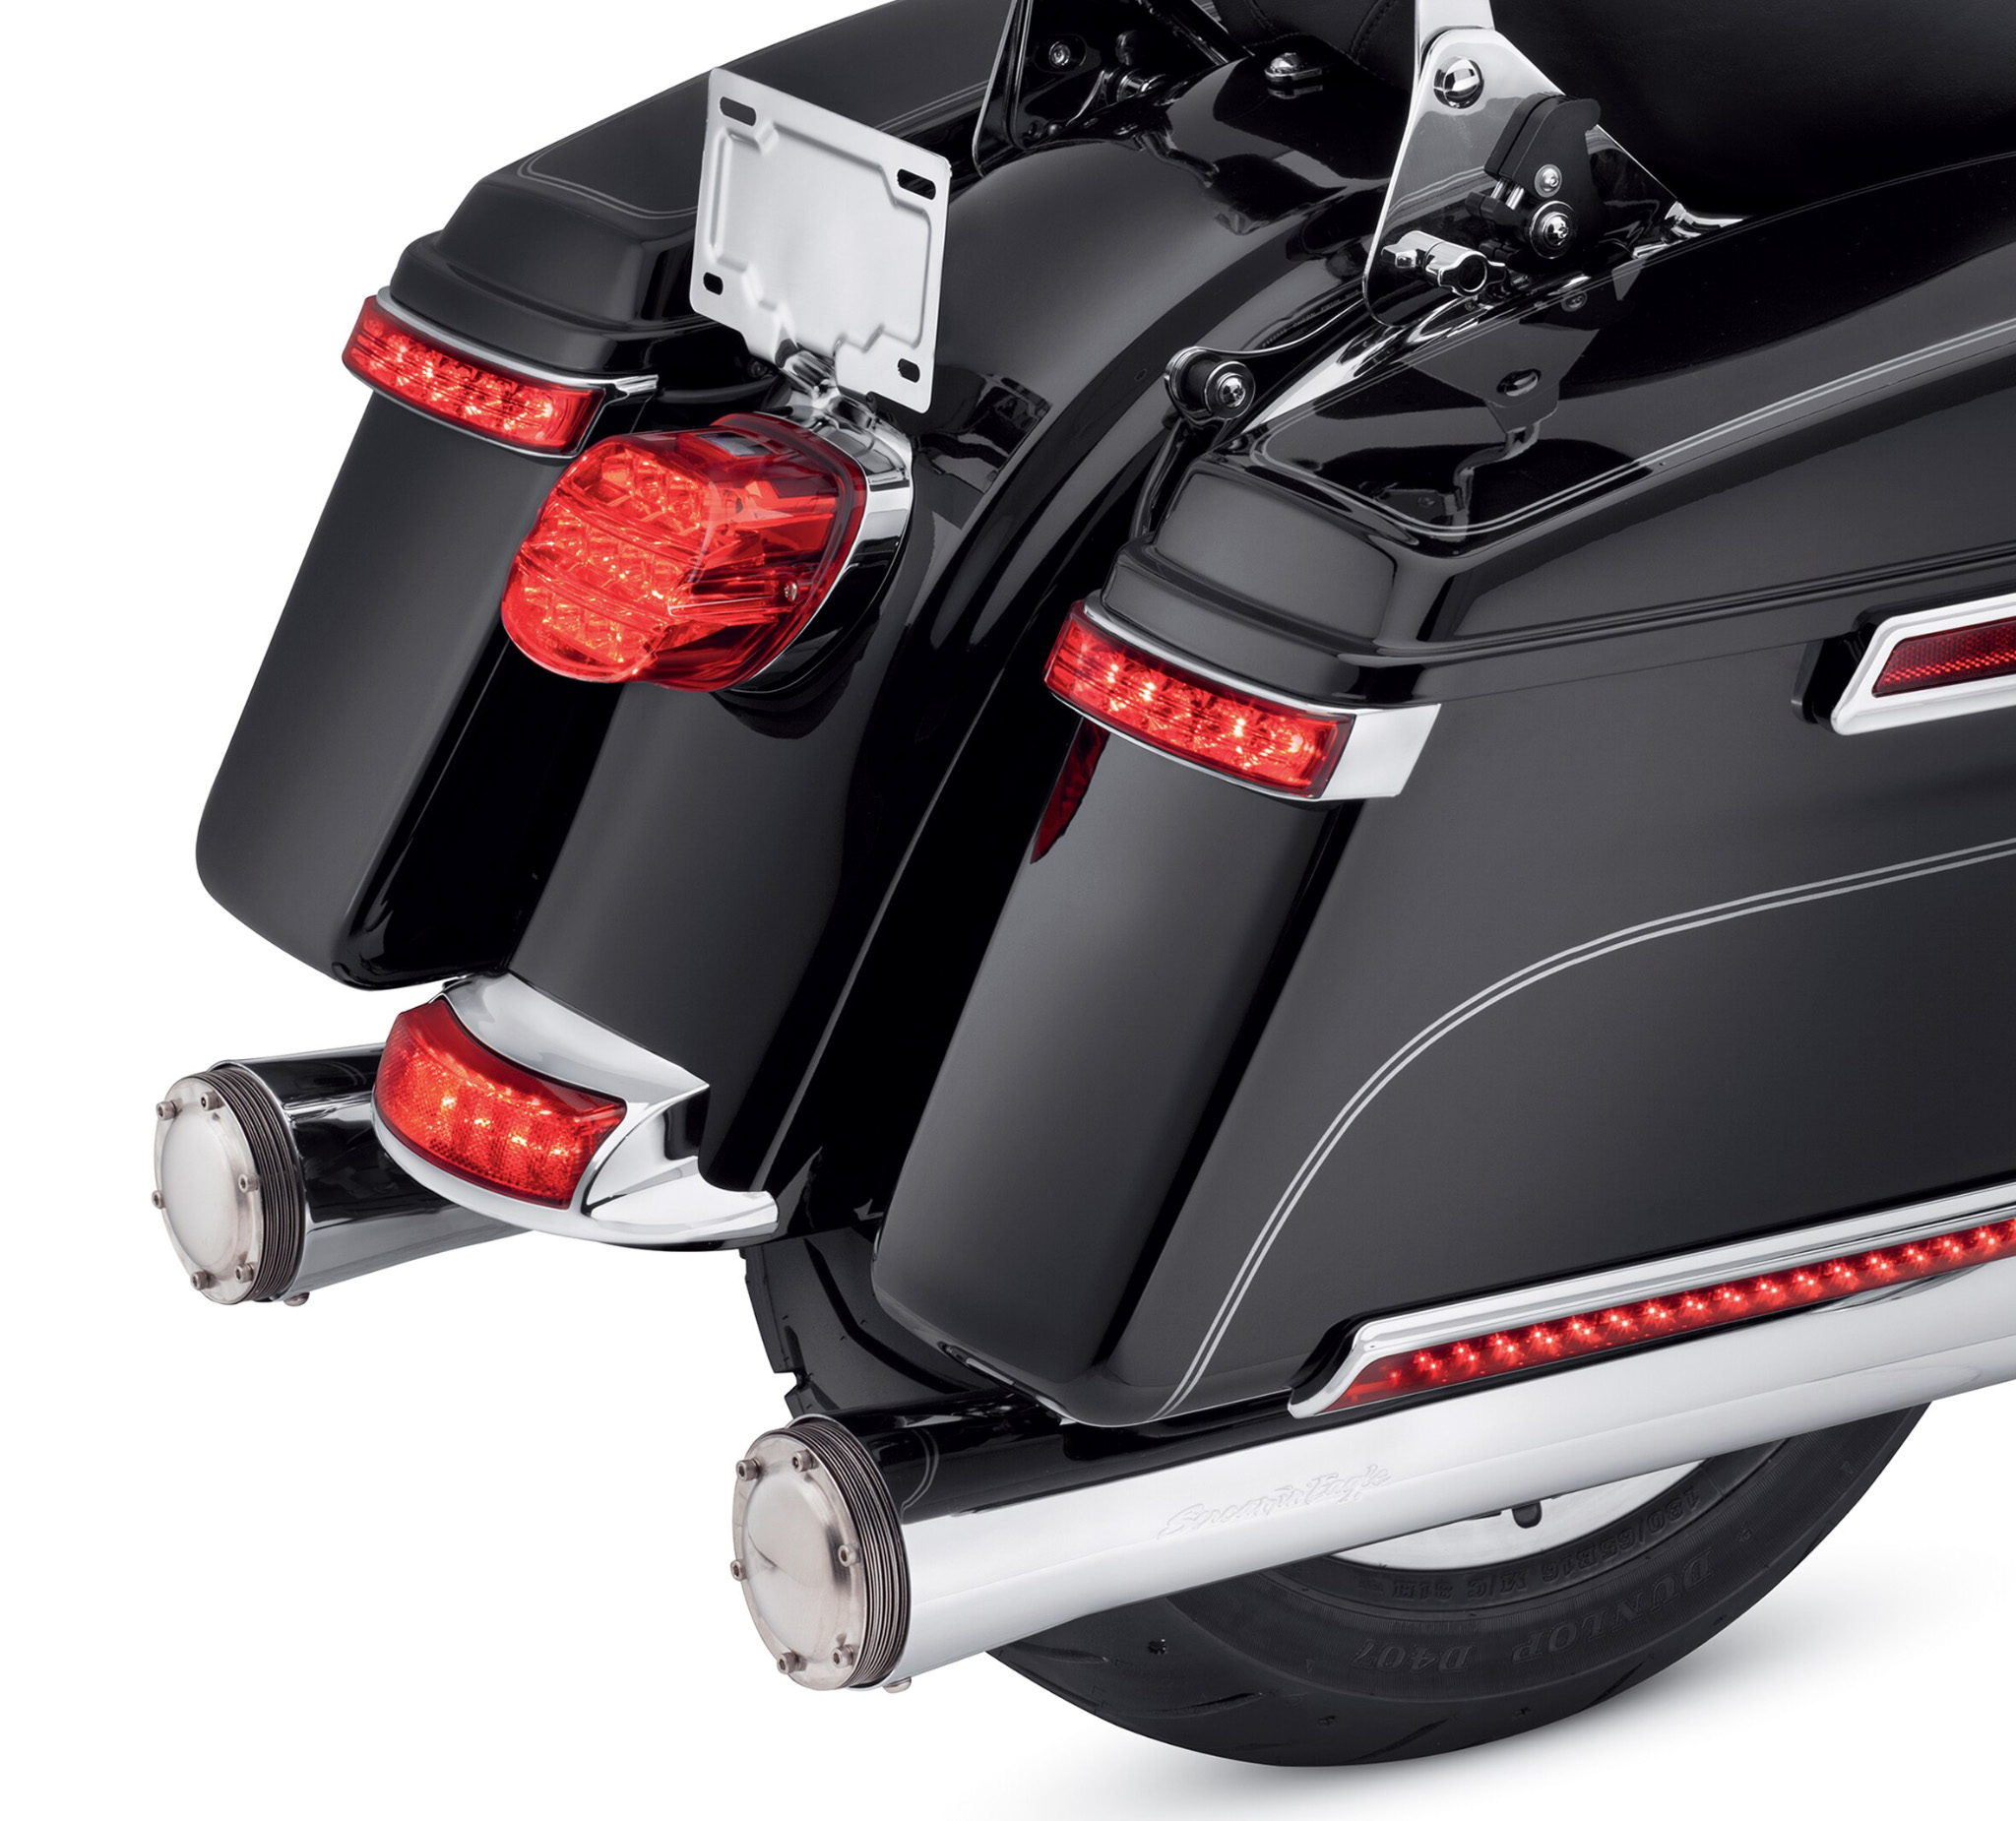 Two Up Detachable Tour Pak Pack Rack Fit For Harley Road Street Glide 2014-2018